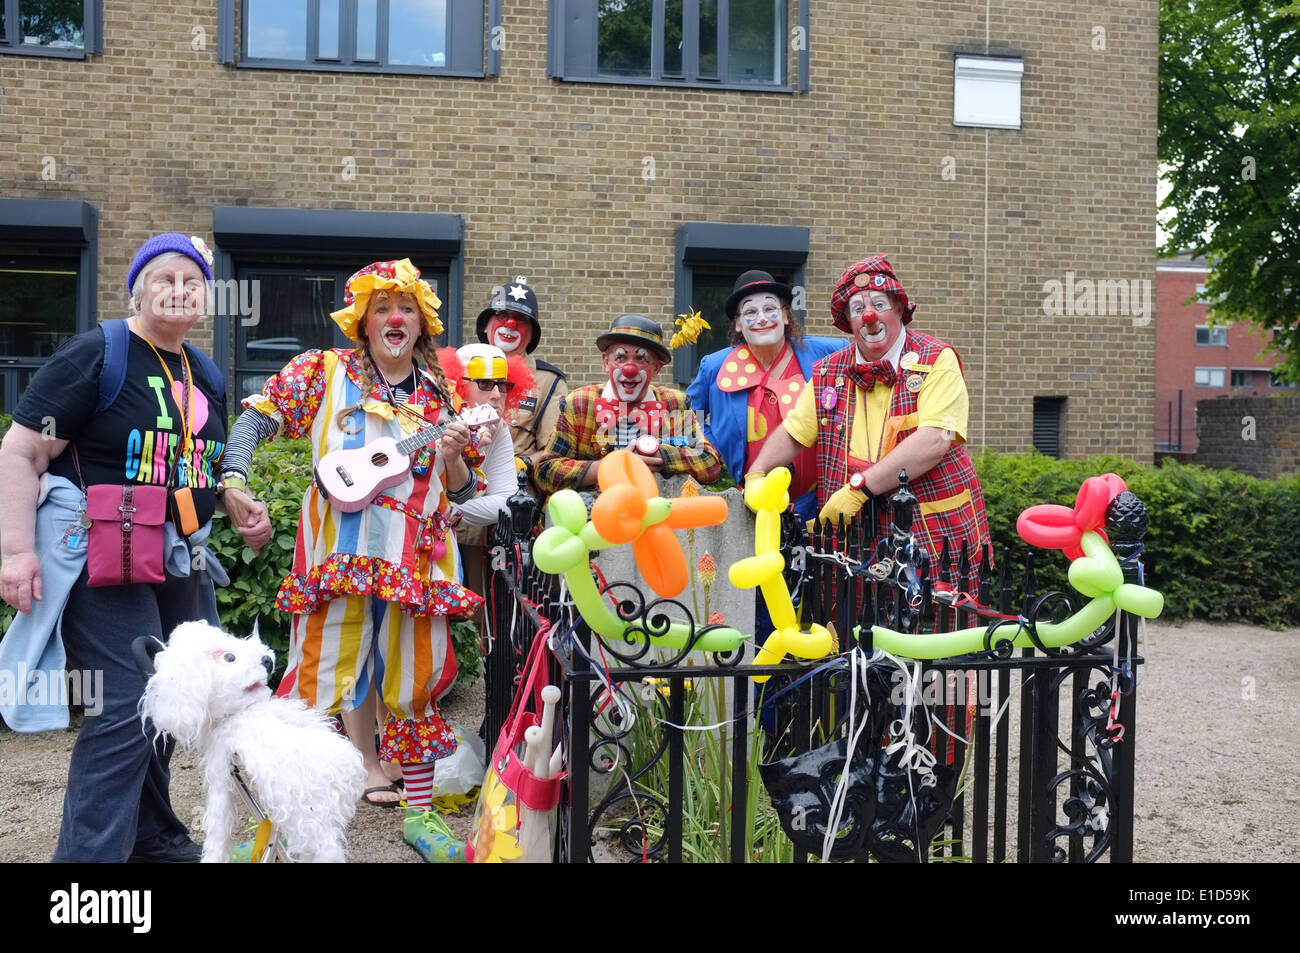 31st May 2014 : clowns celebrate 177 years since the death of Joseph Grimaldi (1778-1837) at his grave in Joseph Grimaldi Park in St. James's Churchyard Pentonville Road, London N1 UK. Stock Photo